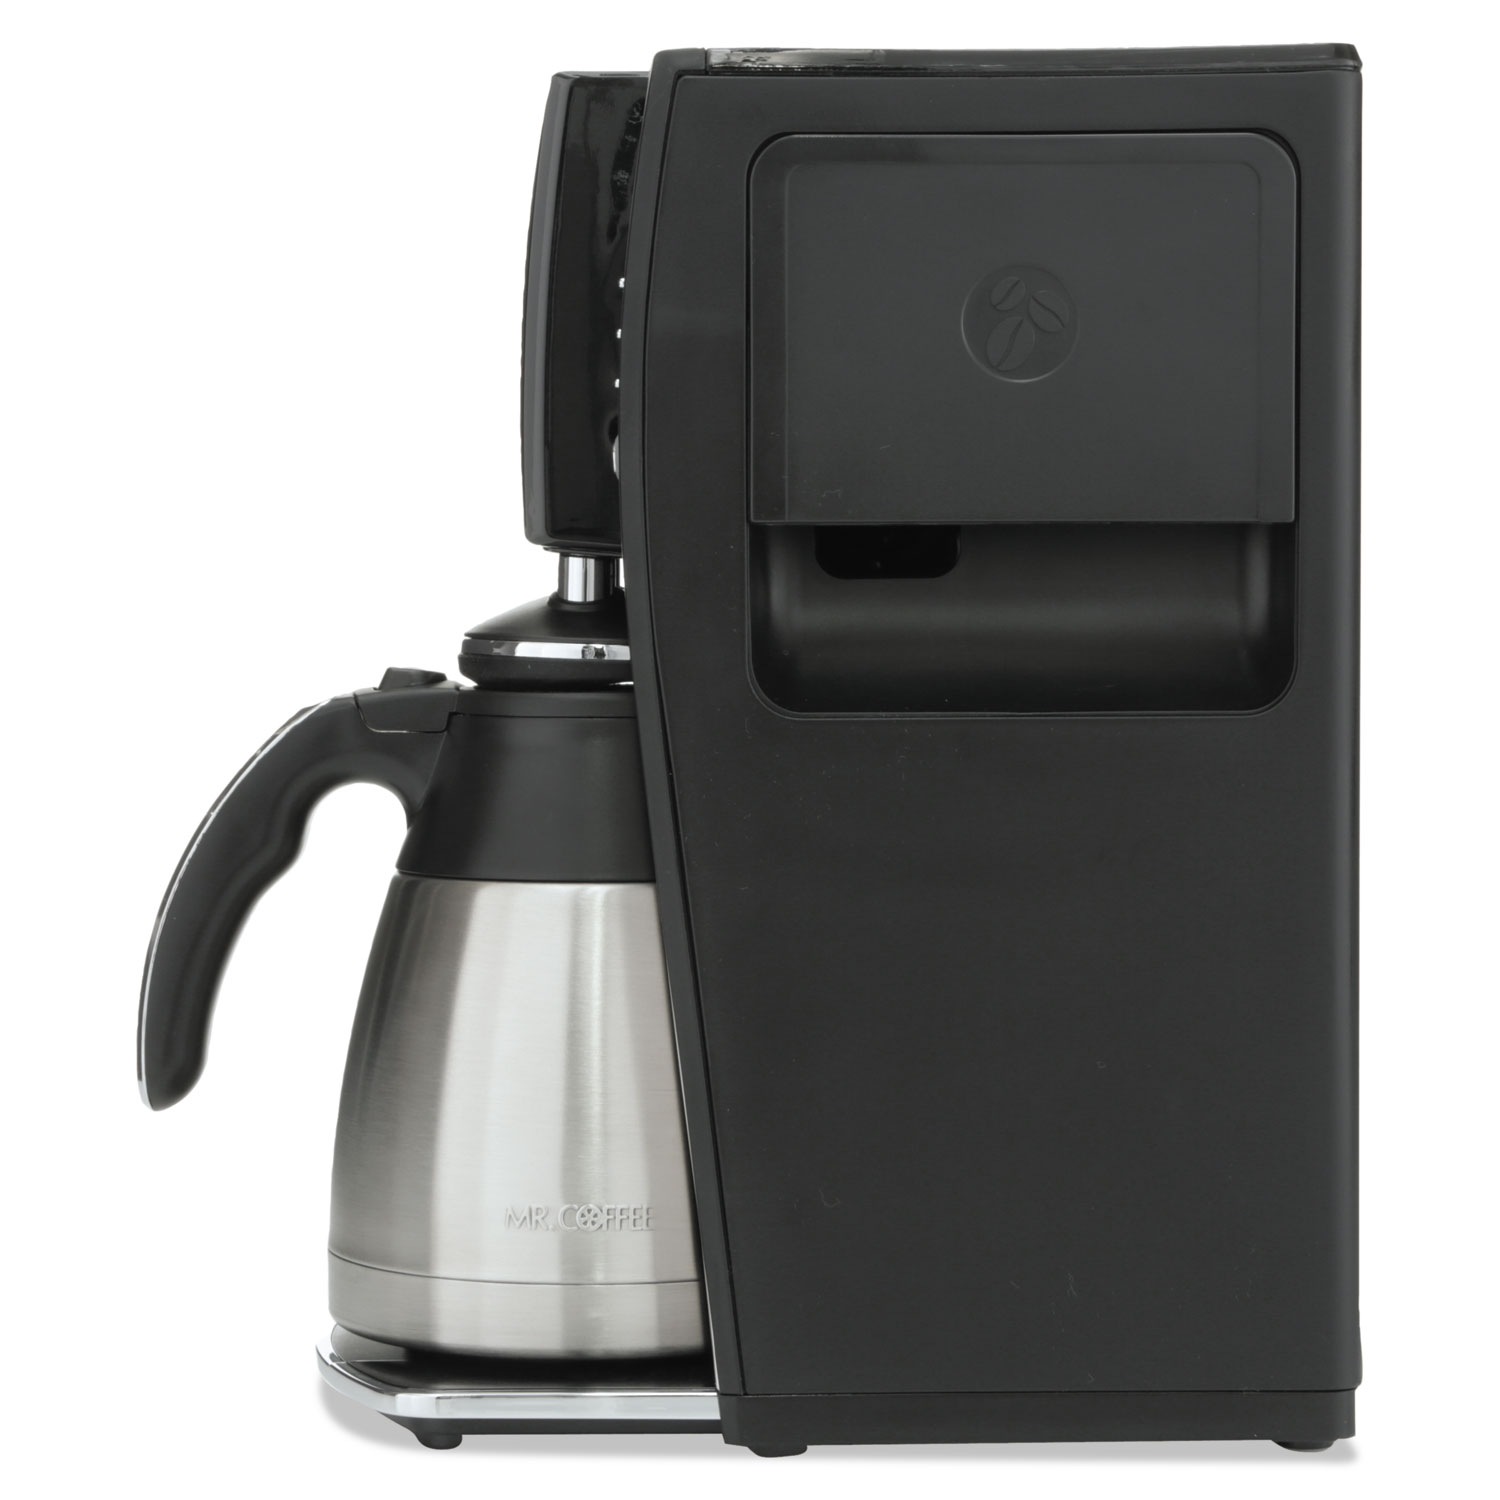 Mr. Coffee Stainless Steel 10 Cup Programmable Coffee Maker - image 3 of 5